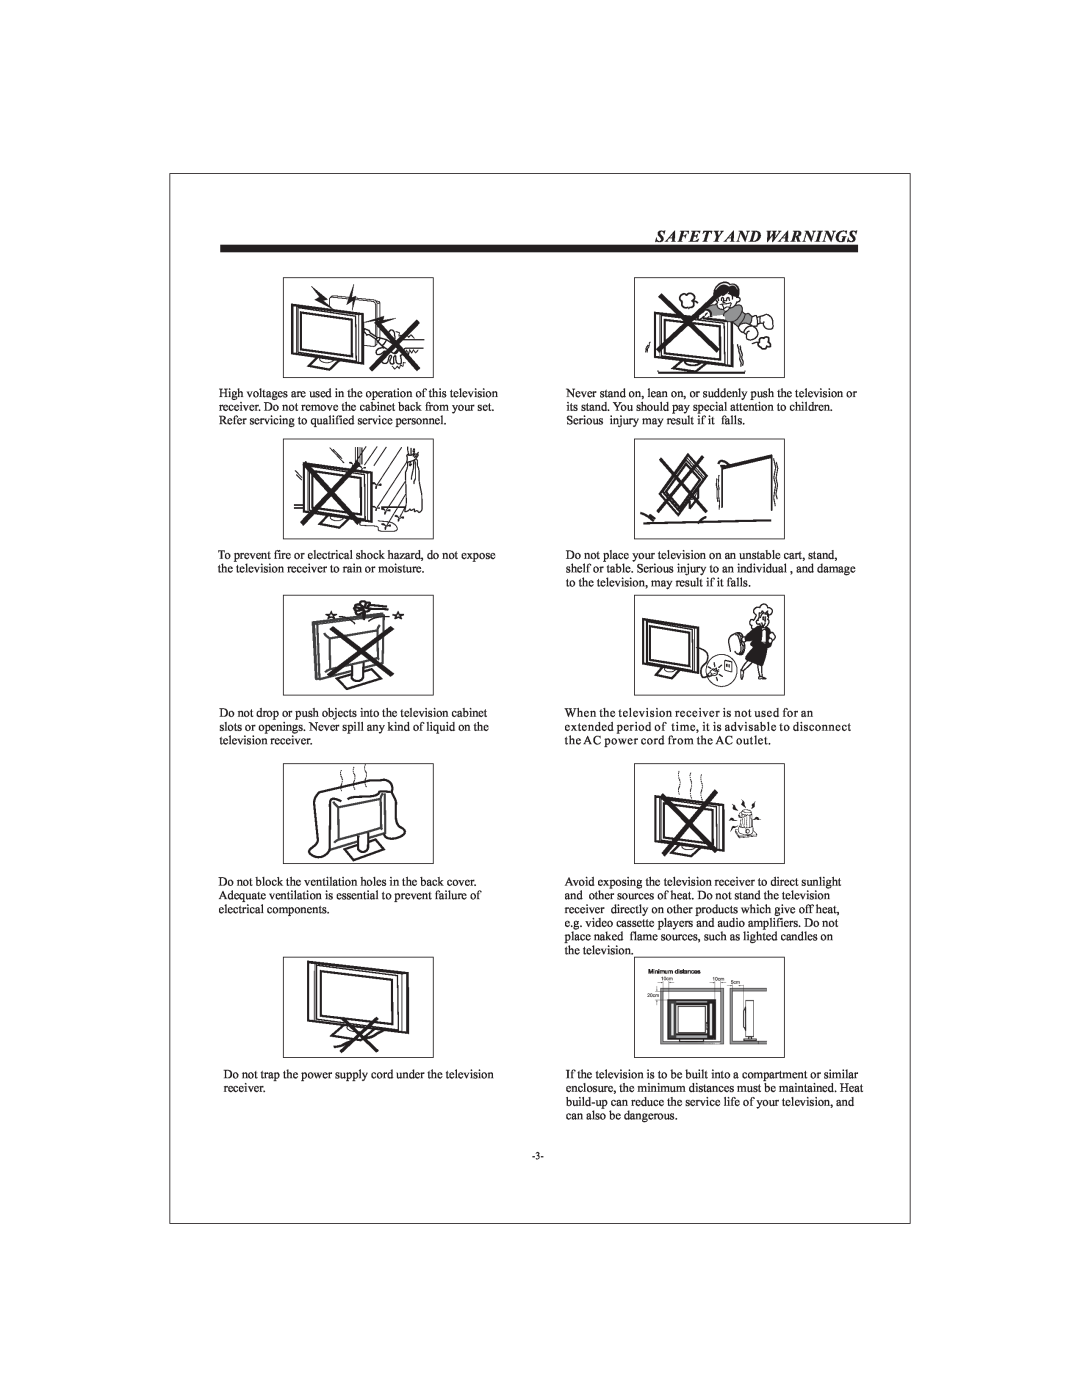 Curtis LCDVD3202A user manual Safety And Warnings, Do not trap the power supply cord under the television receiver 